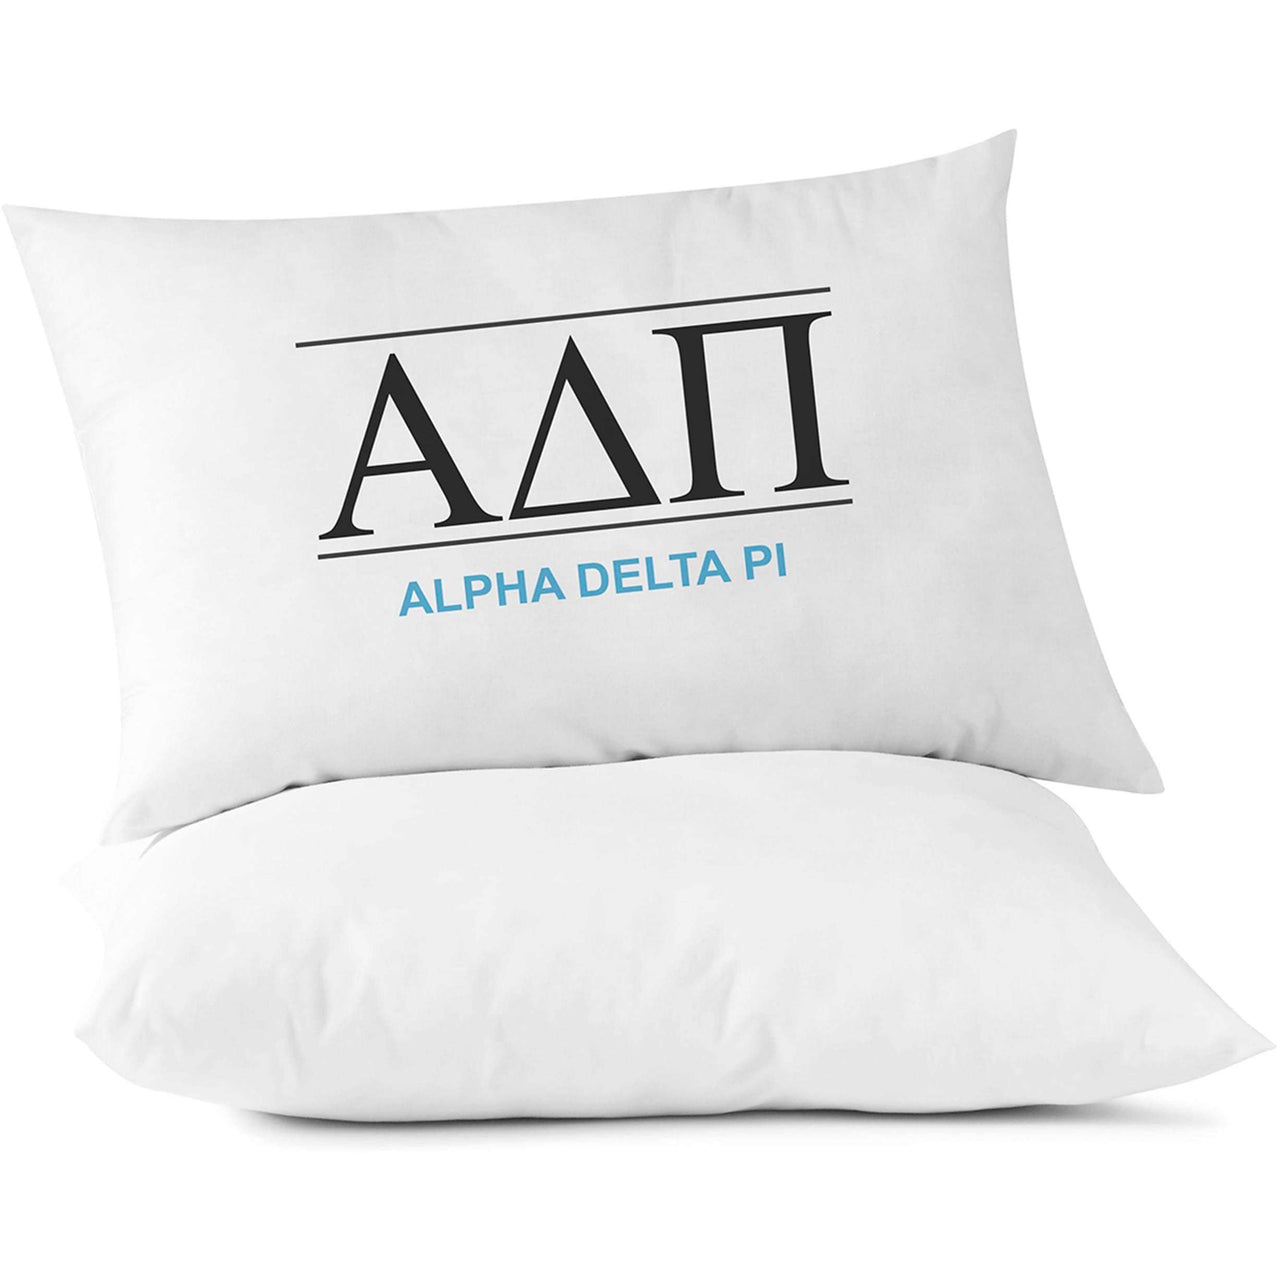 Classic Sorority Greek Letters and Name Pillowcases